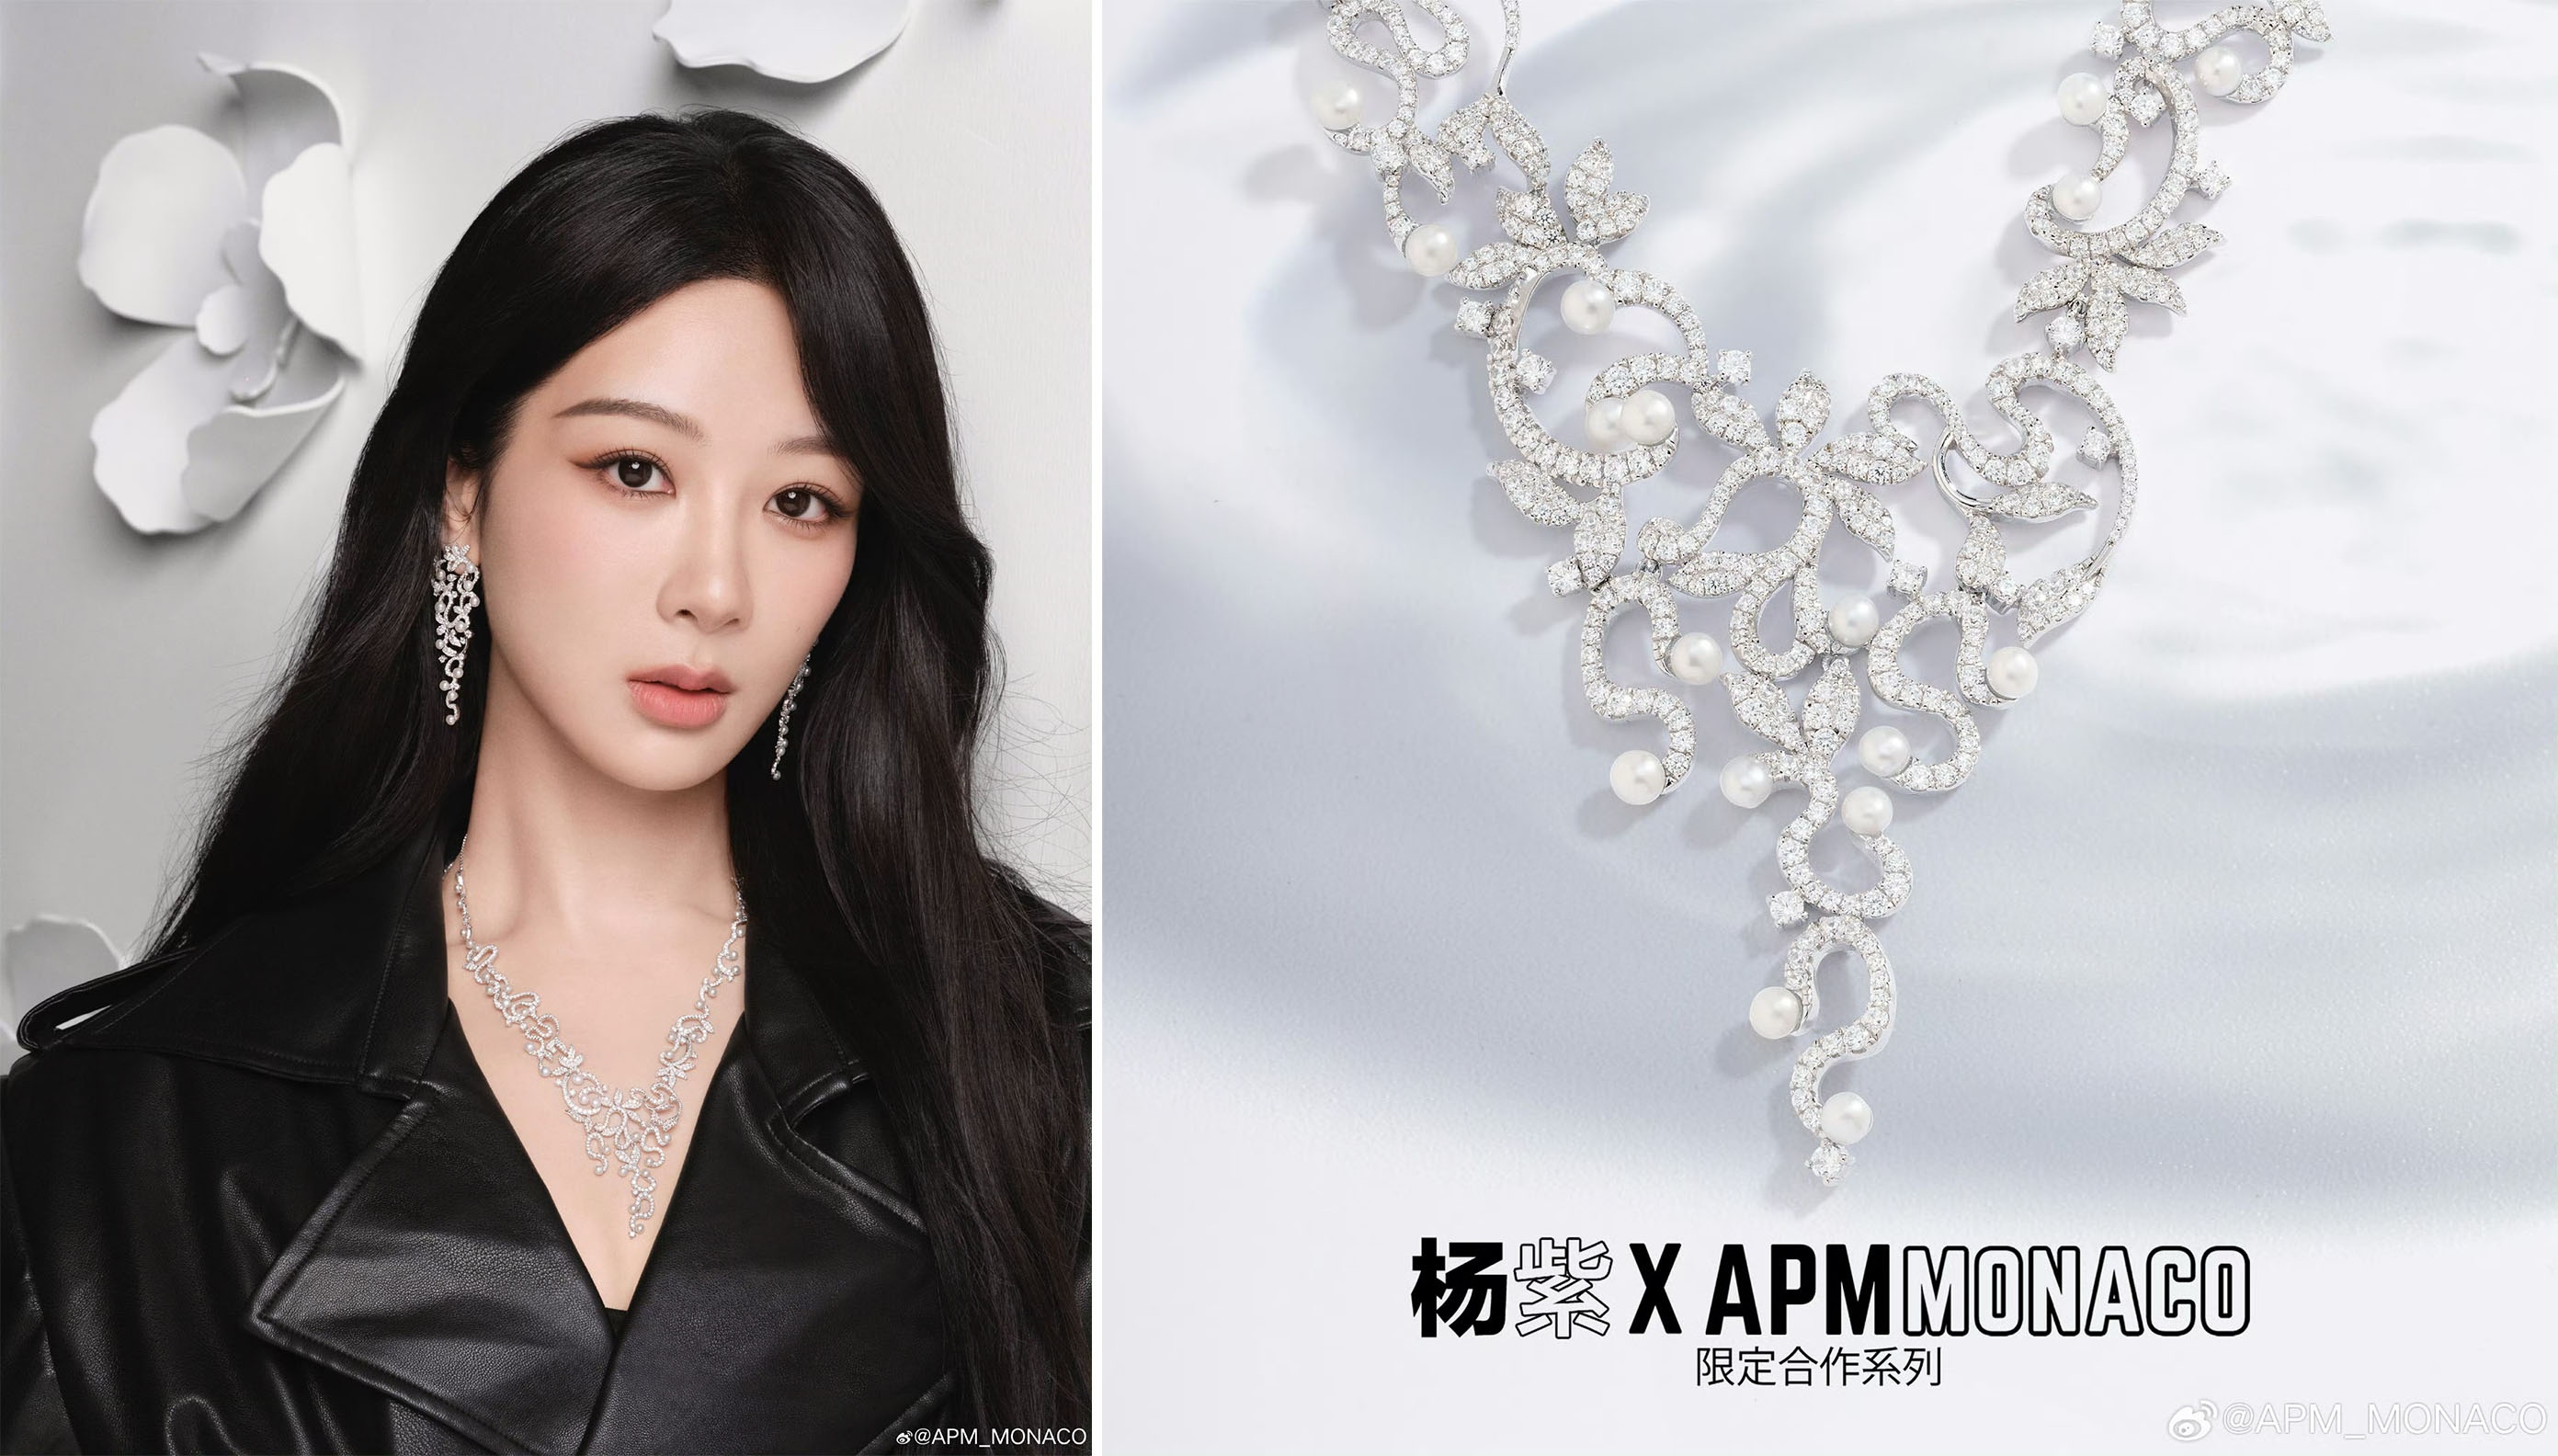 APM Monaco released a capsule collection with Chinese actress Yang Zi in April. Image: APM Monaco